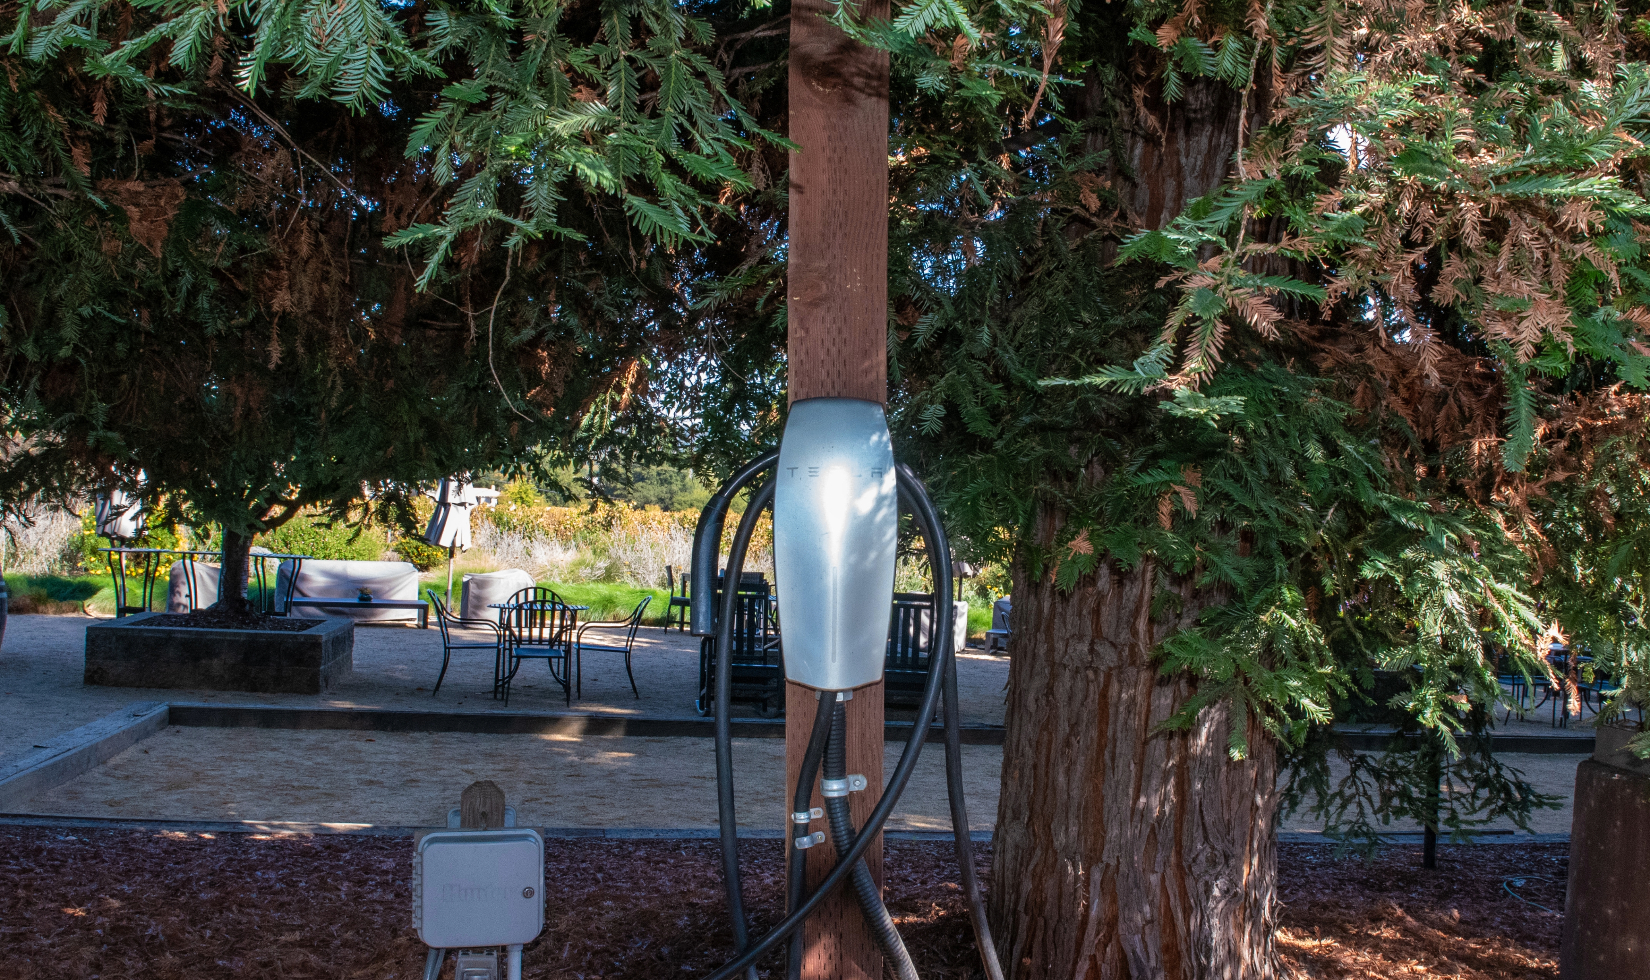 EV charger on post in parking lot in front of winery terrace